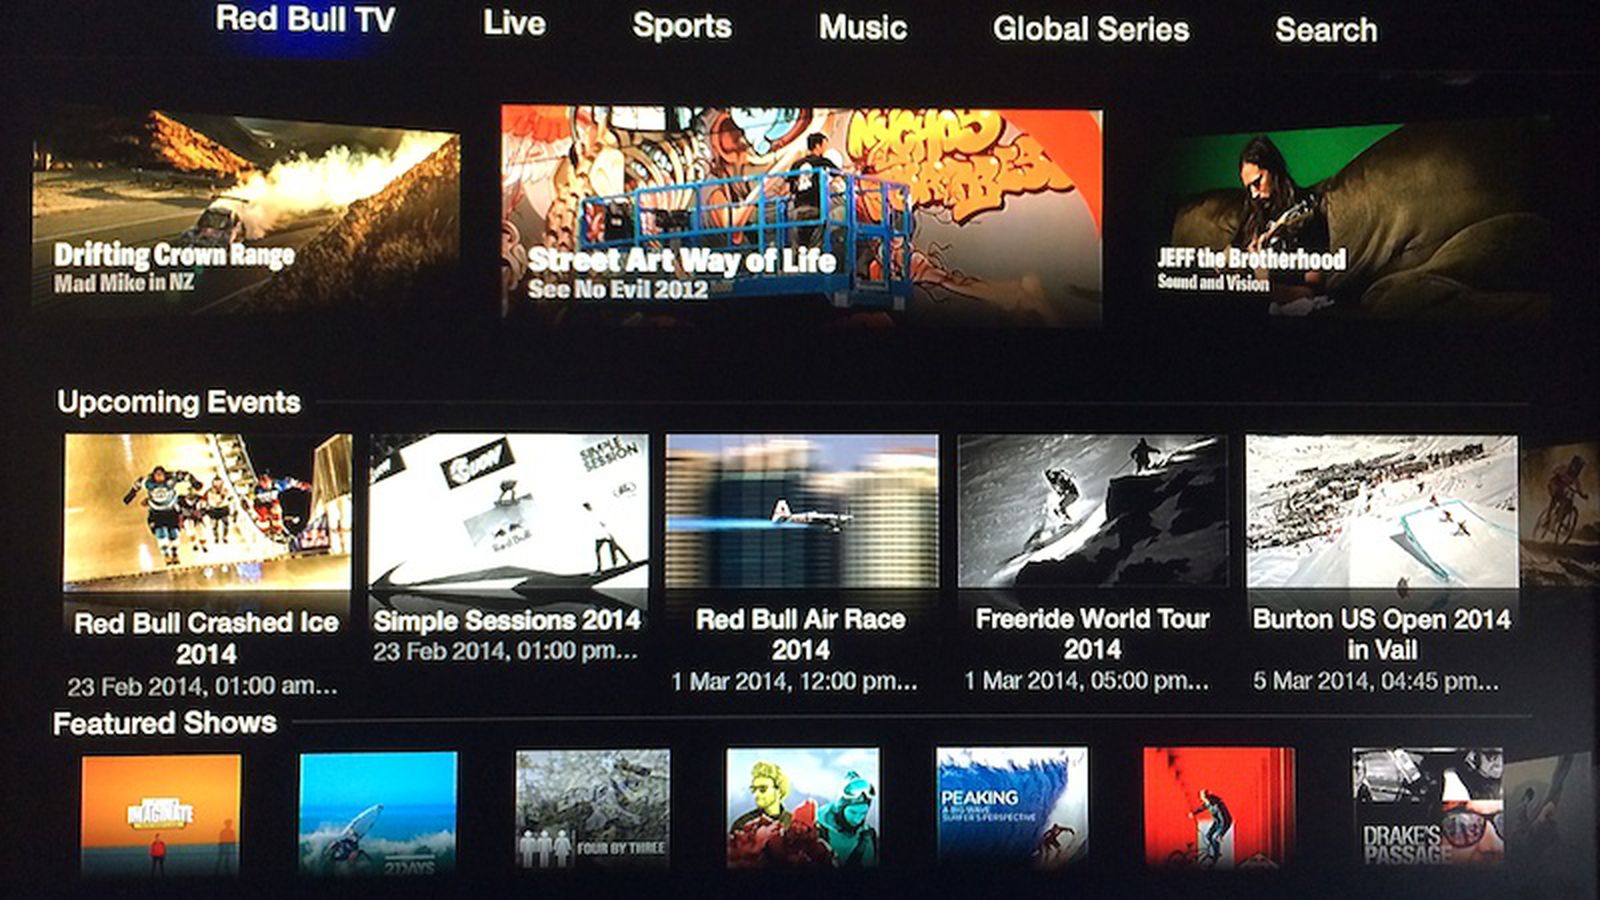 Apple Adds 'Red Bull TV' Action Sports Channel to Apple TV - MacRumors